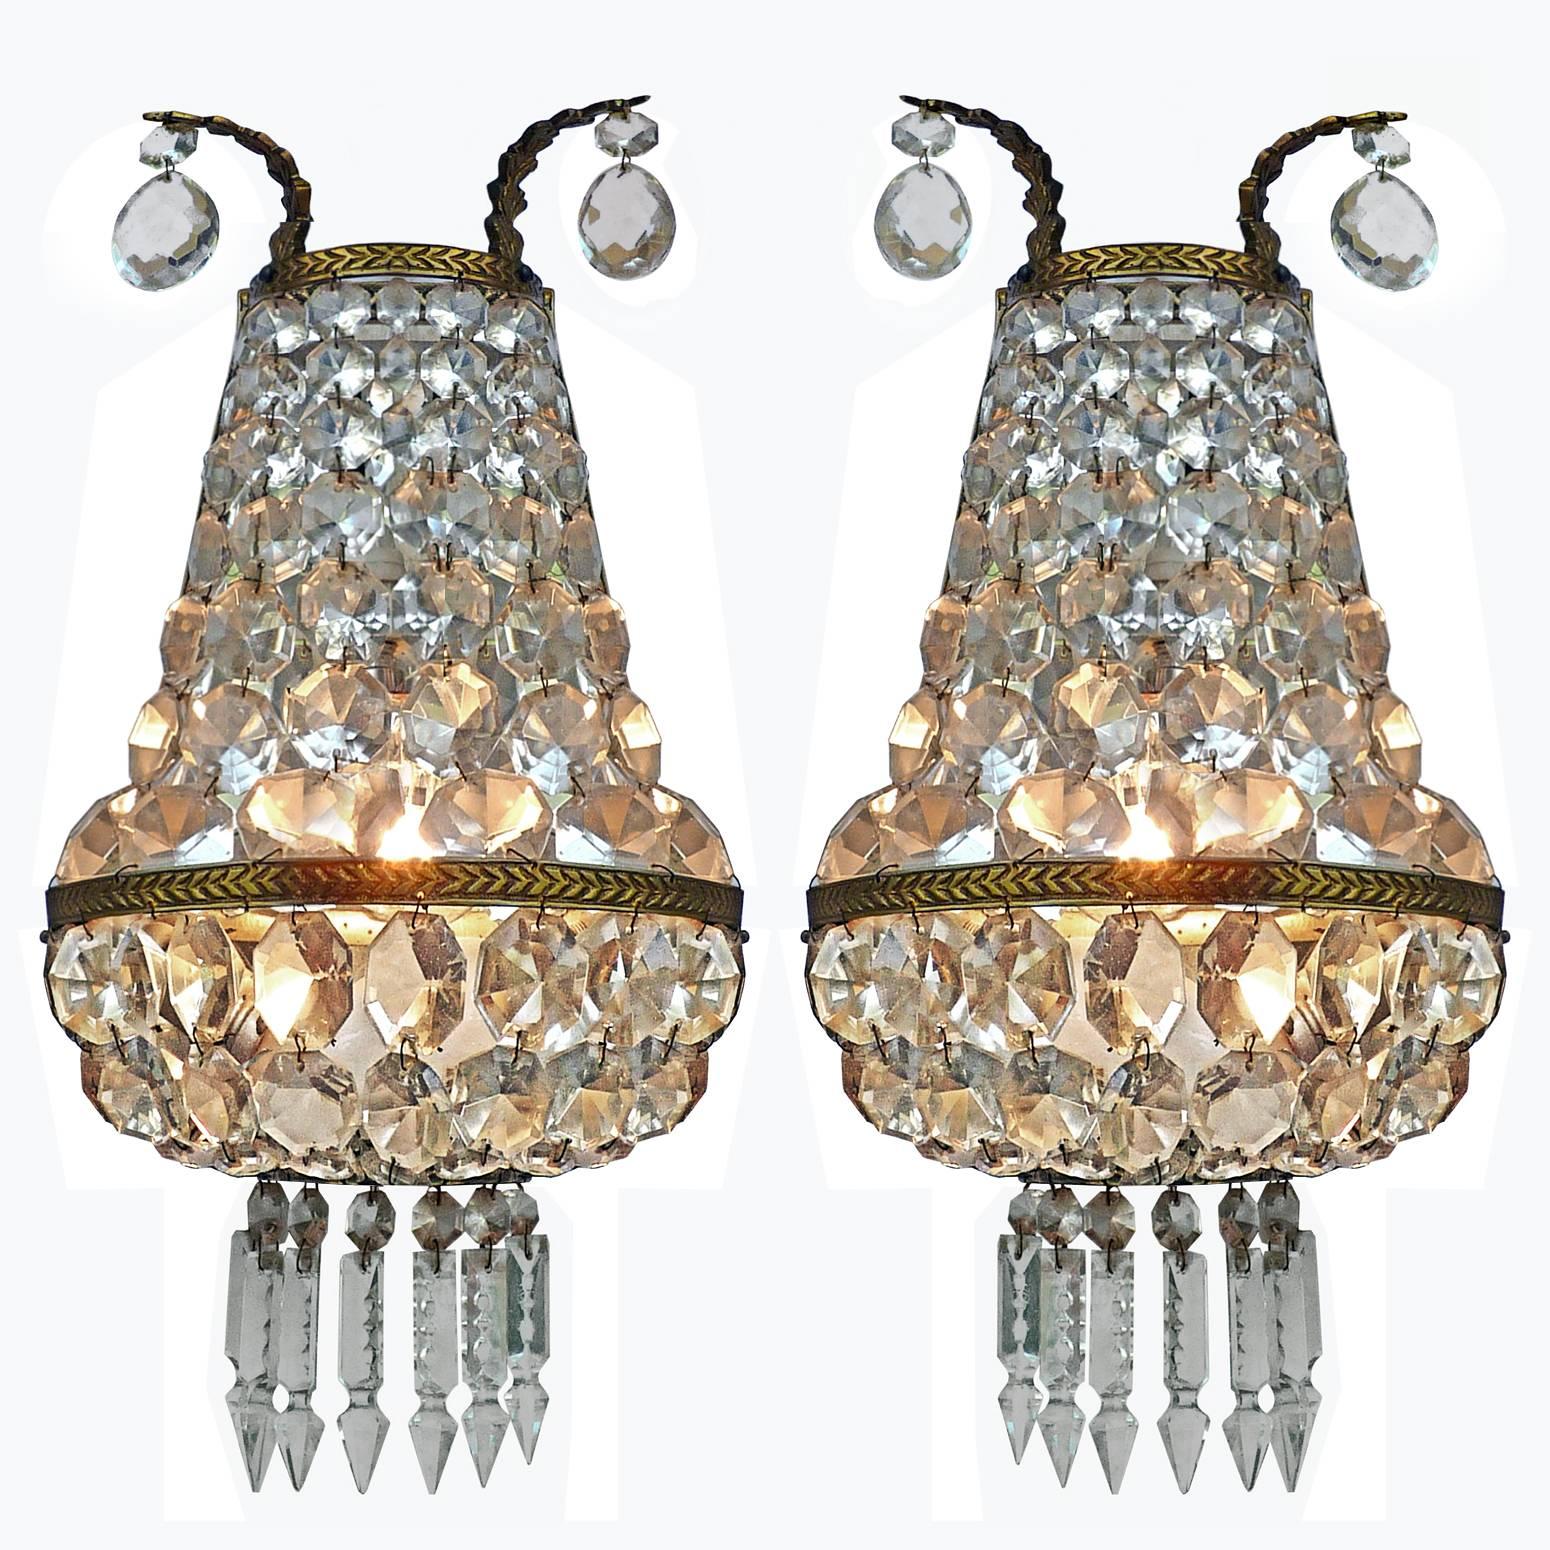 Housing two-light bulbs each E14. Bronze detailing with all crystal intact. 